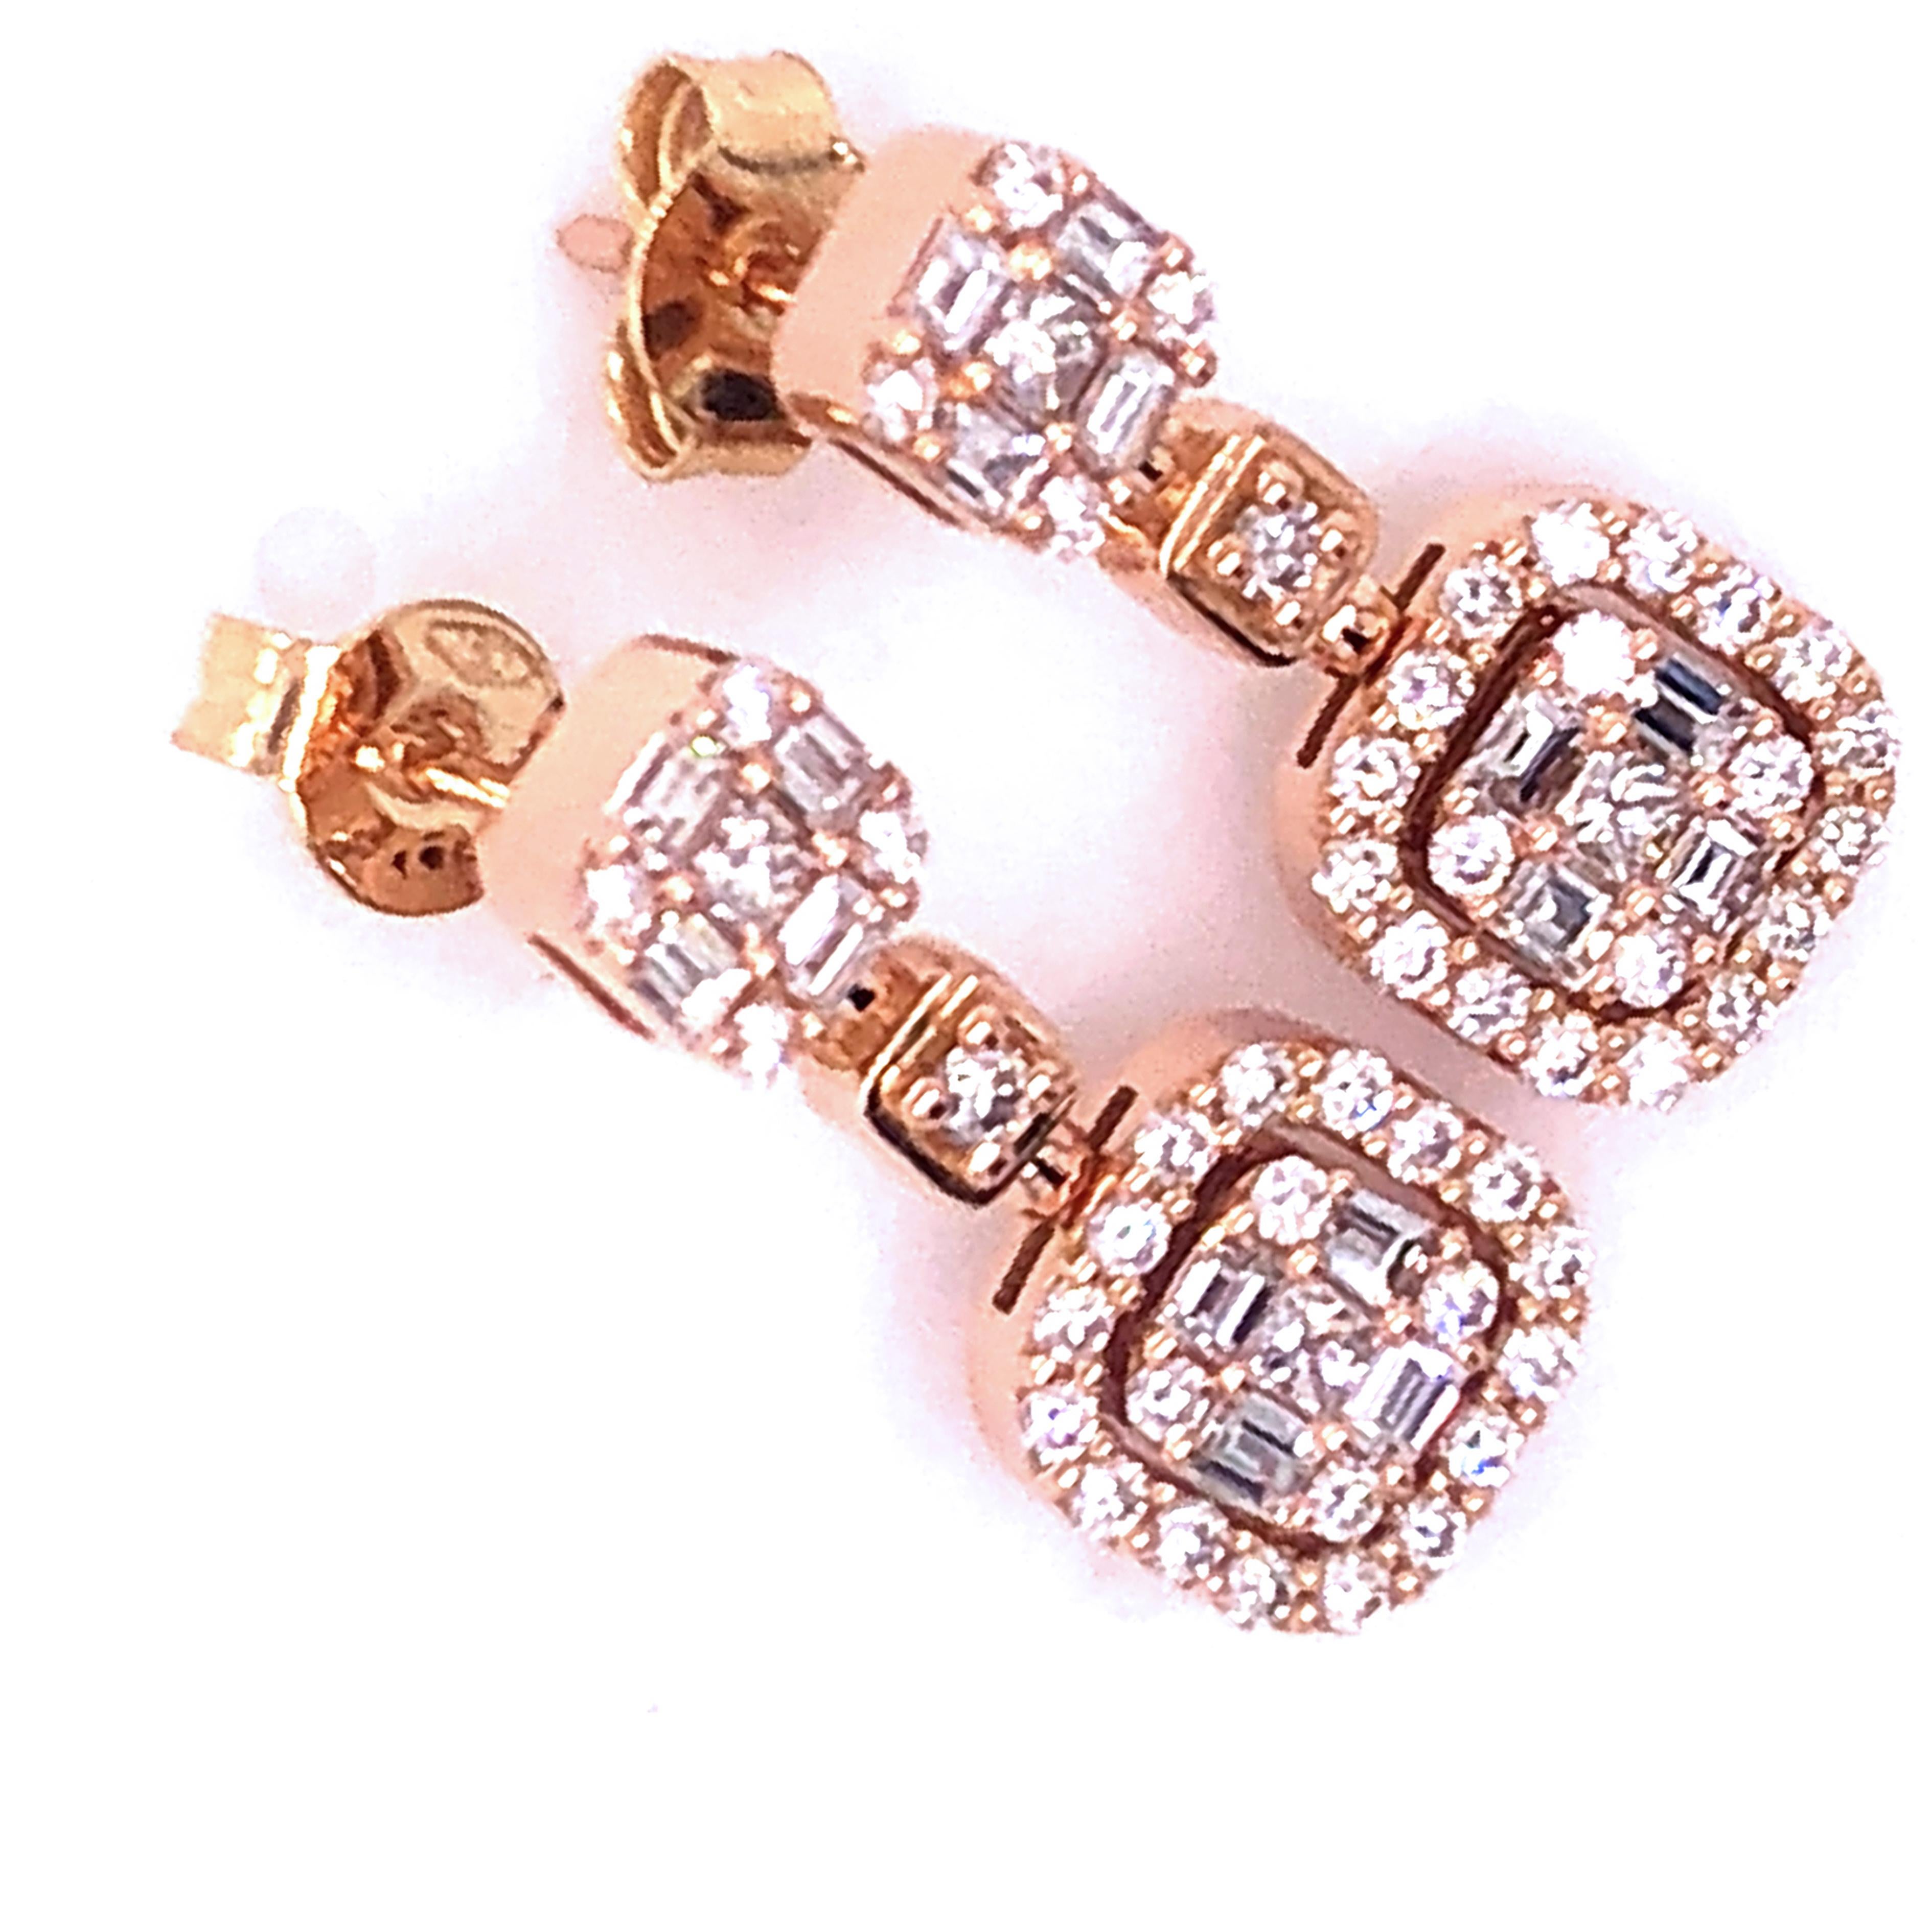 Chic yet timeless, absolutely wearable, yet unique, 0.59Kt baguette, 0.19Kt princess, 0.45Kt brilliant cut (D-E, VVs1)earrings in an 18Kt Rose Gold hand crafted Setting.
In our smart burgundy leather box and pouch.
Our pieces are all accompanied by